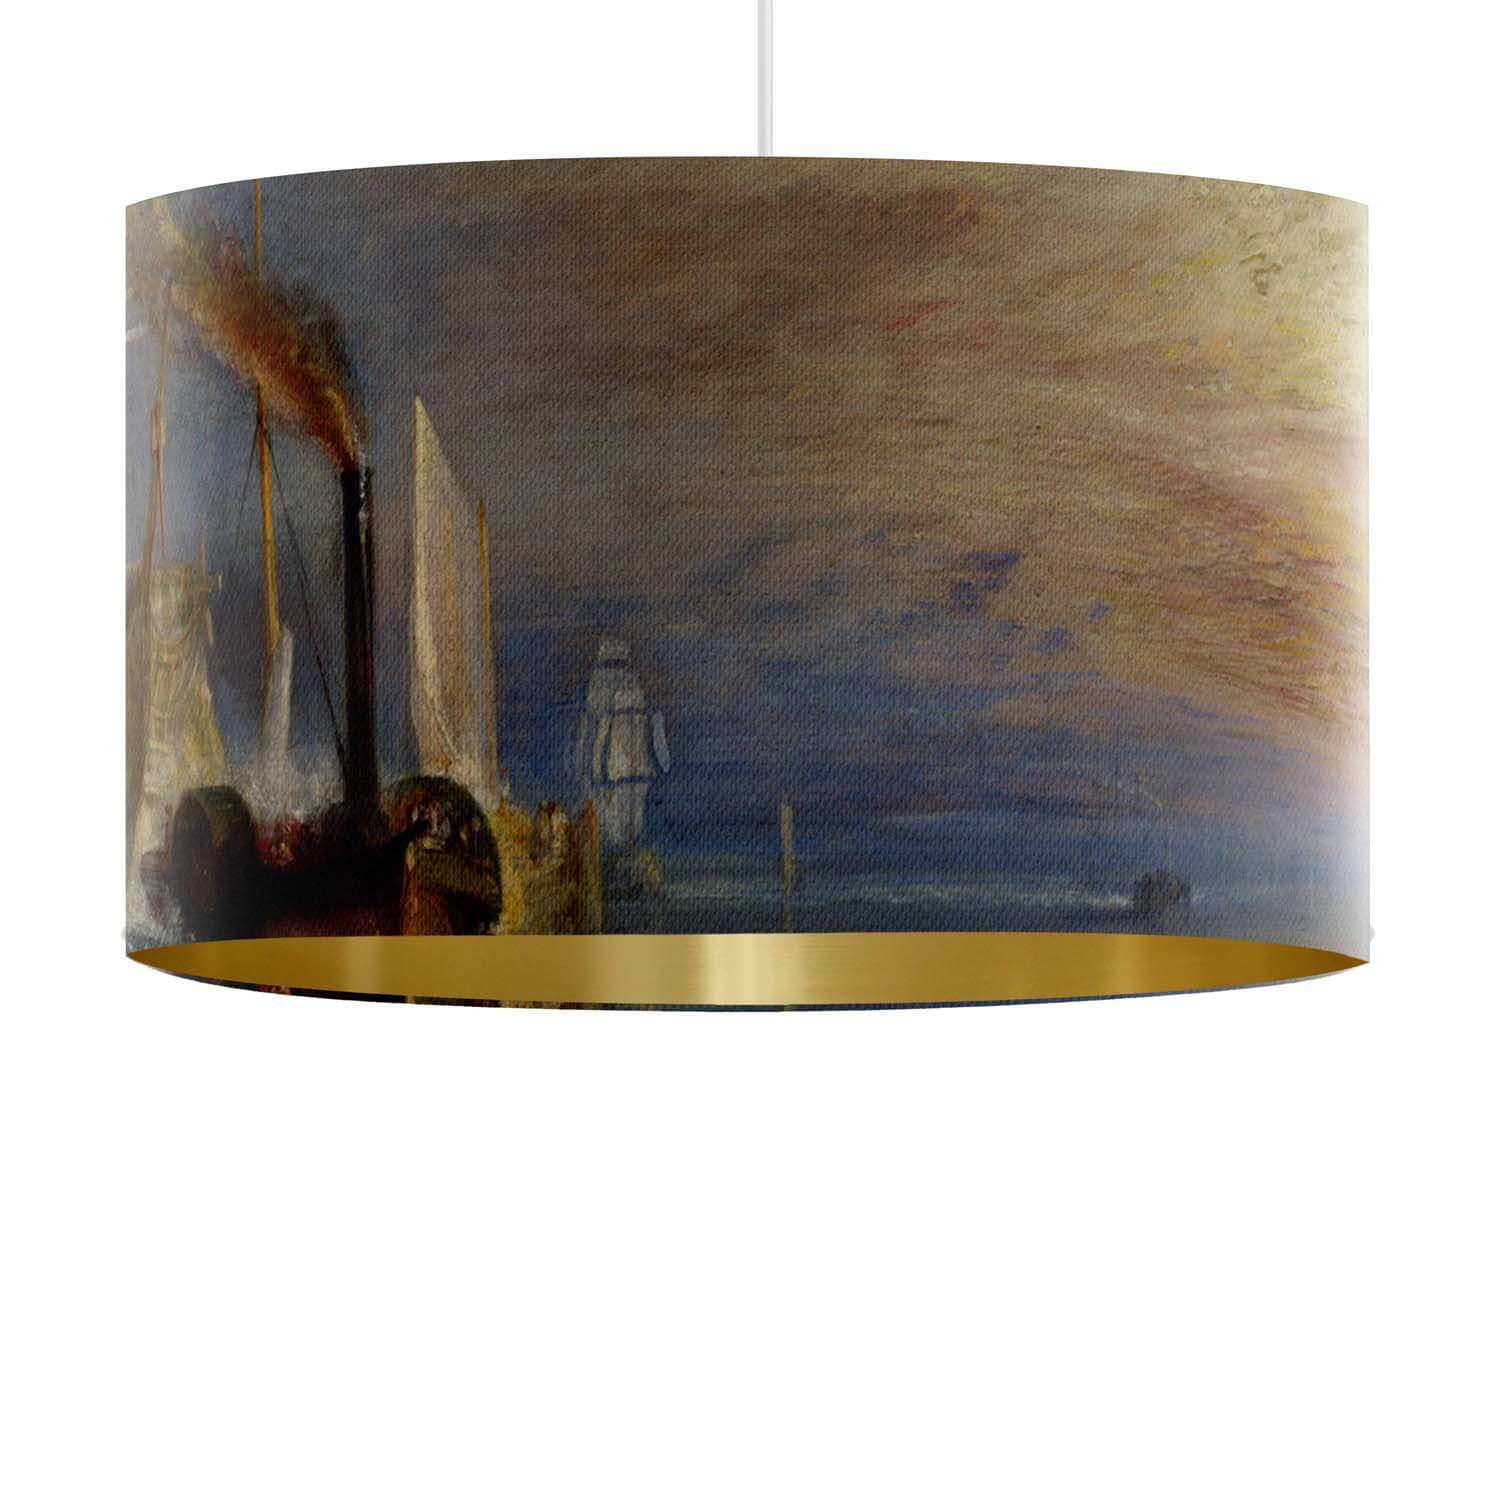 The Fighting Temeraire - J.M.W. Turner - National Gallery Lampshade